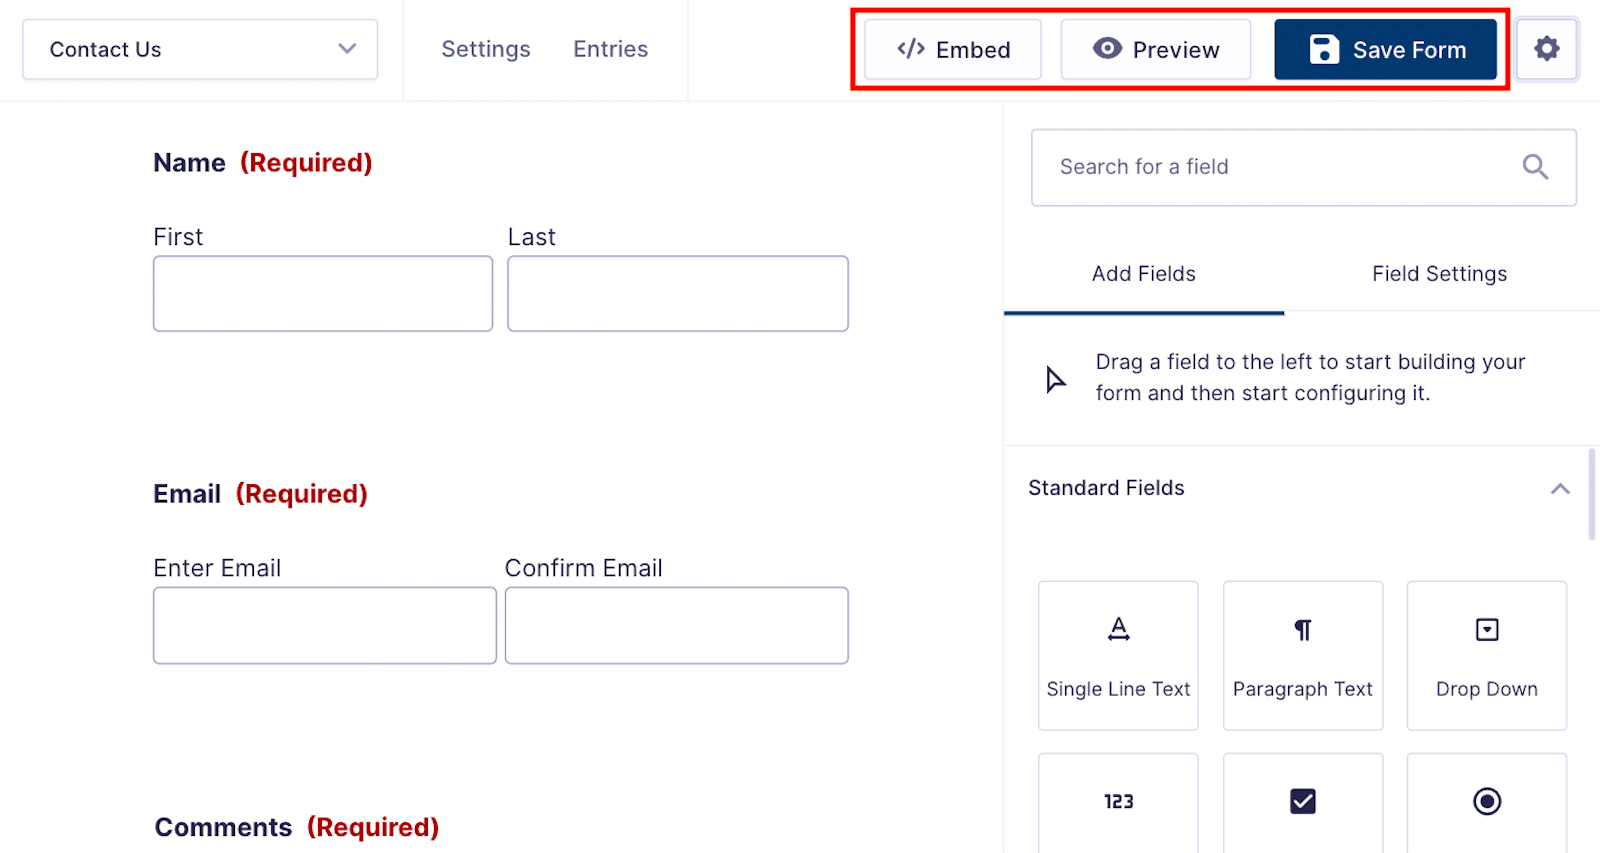 Choosing to embed, preview, or save a form in Gravity Forms